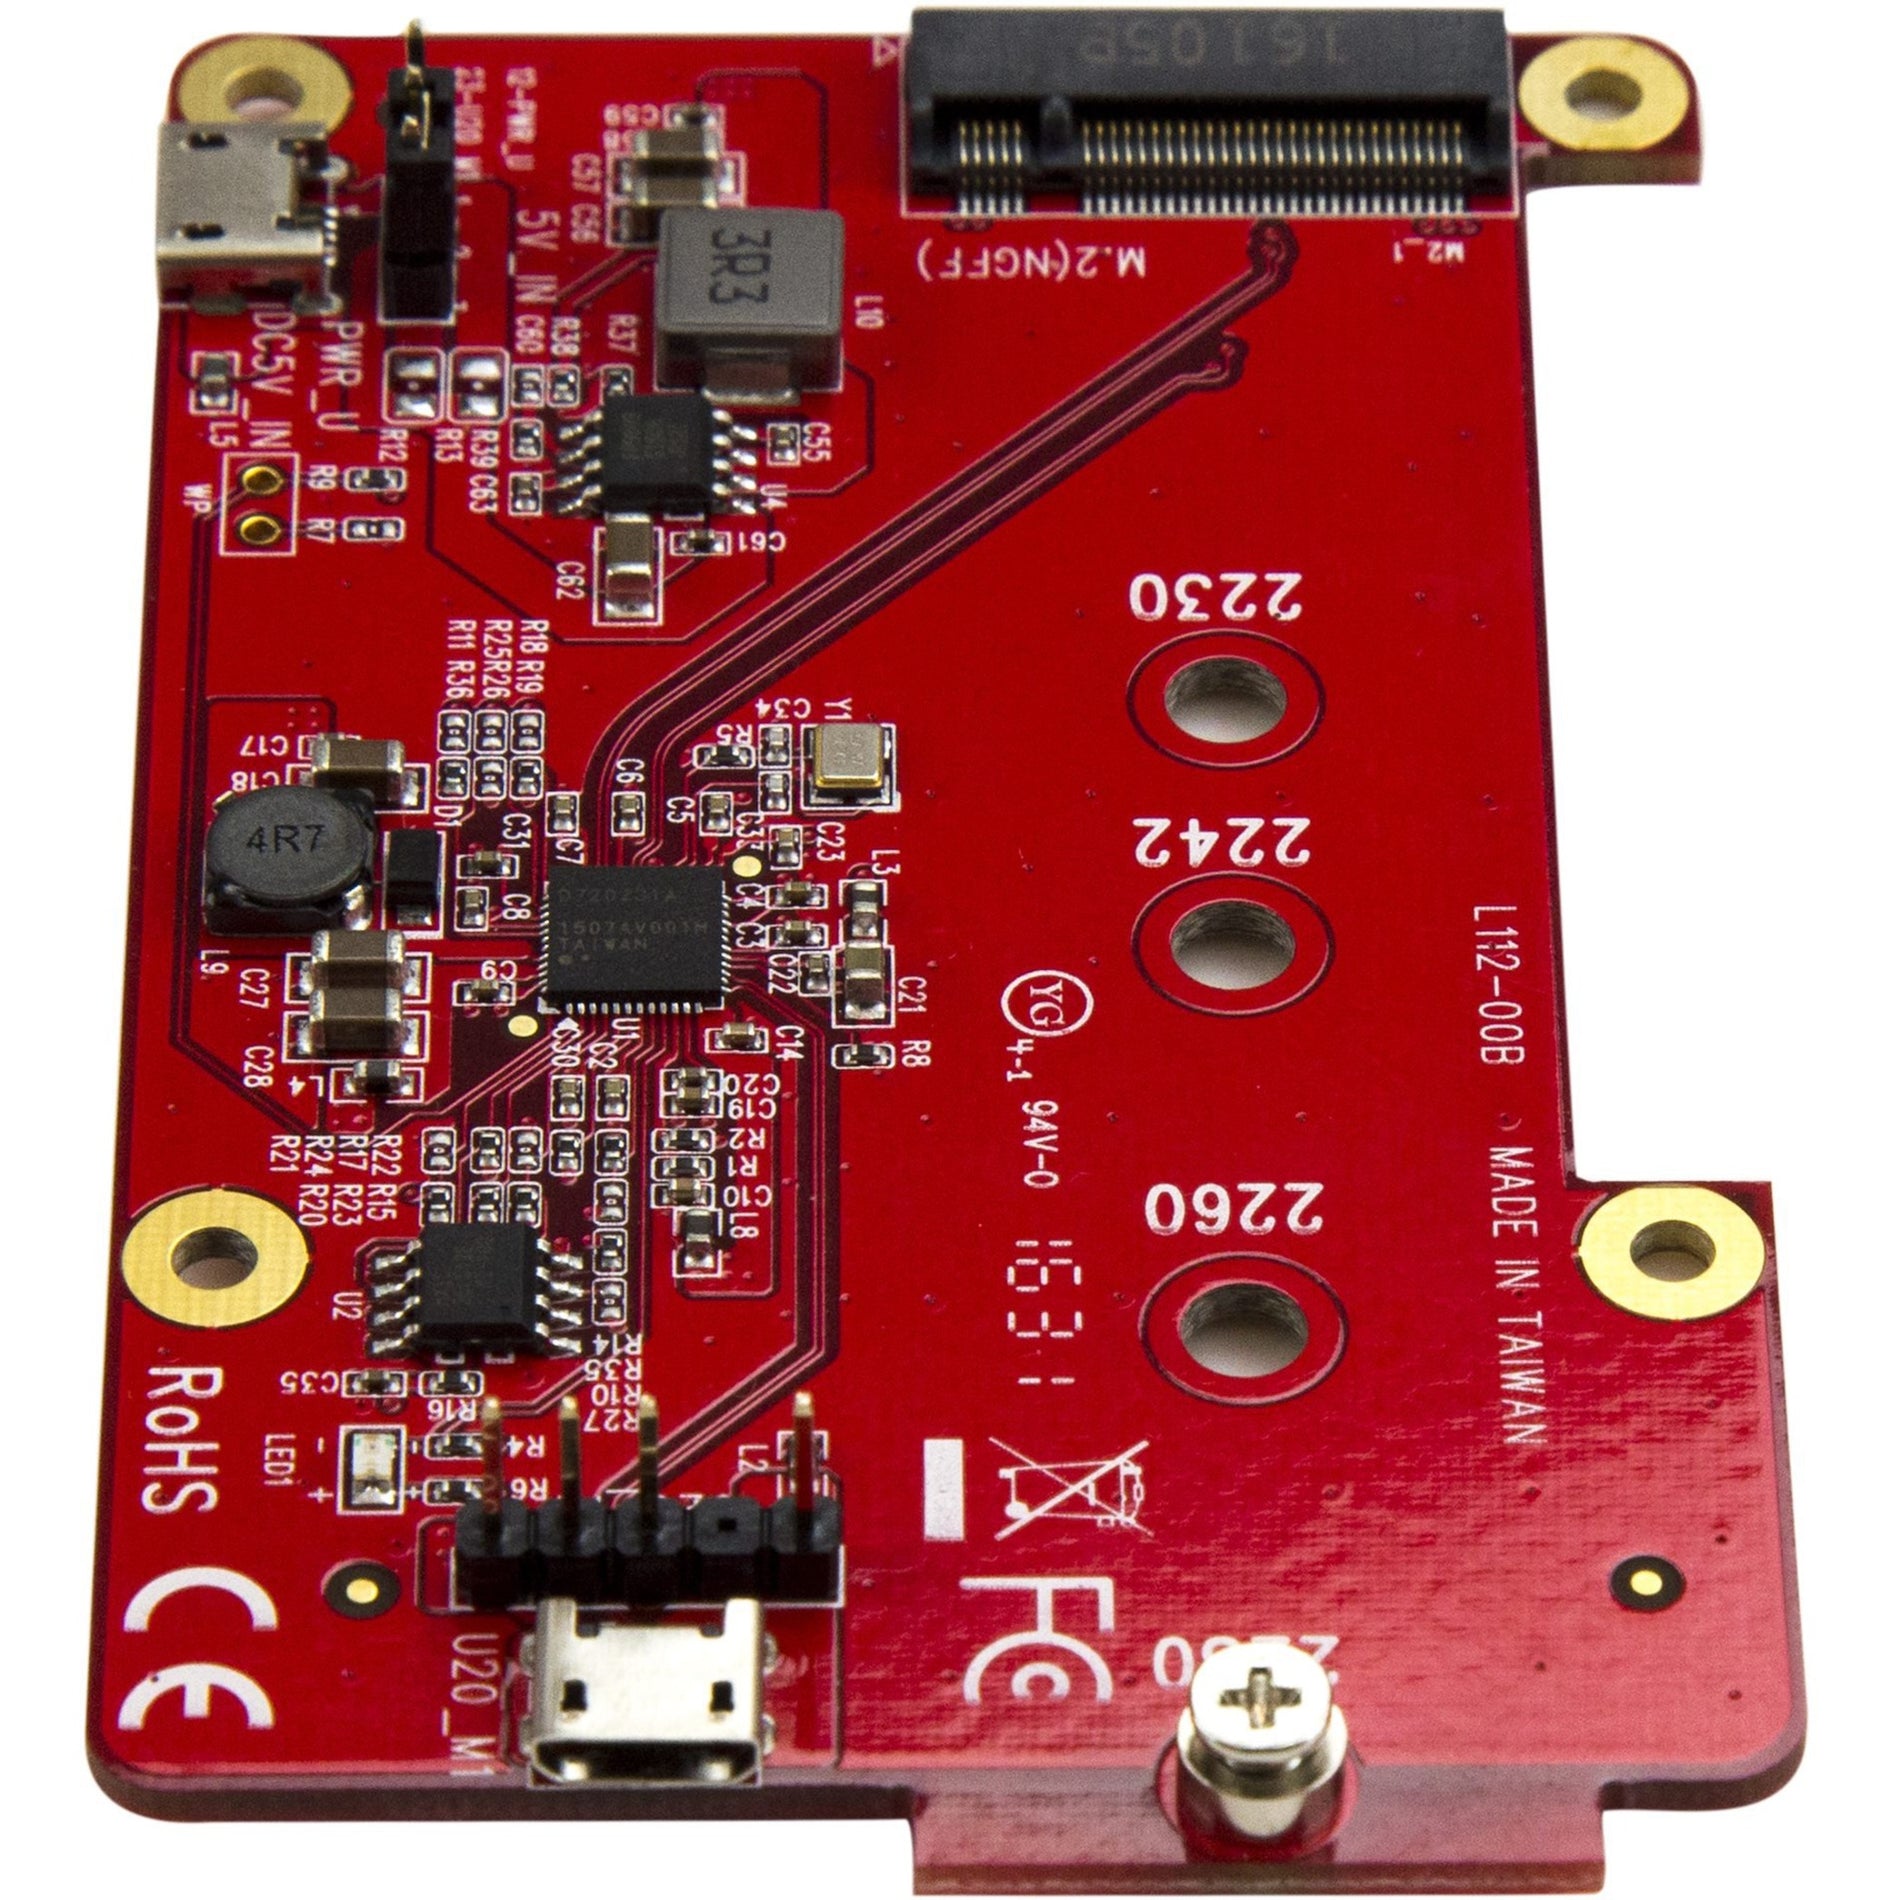 StarTech.com PIB2M21 USB to M.2 SATA Converter for Raspberry Pi and Development Boards, Easy SSD Connection and Data Transfer